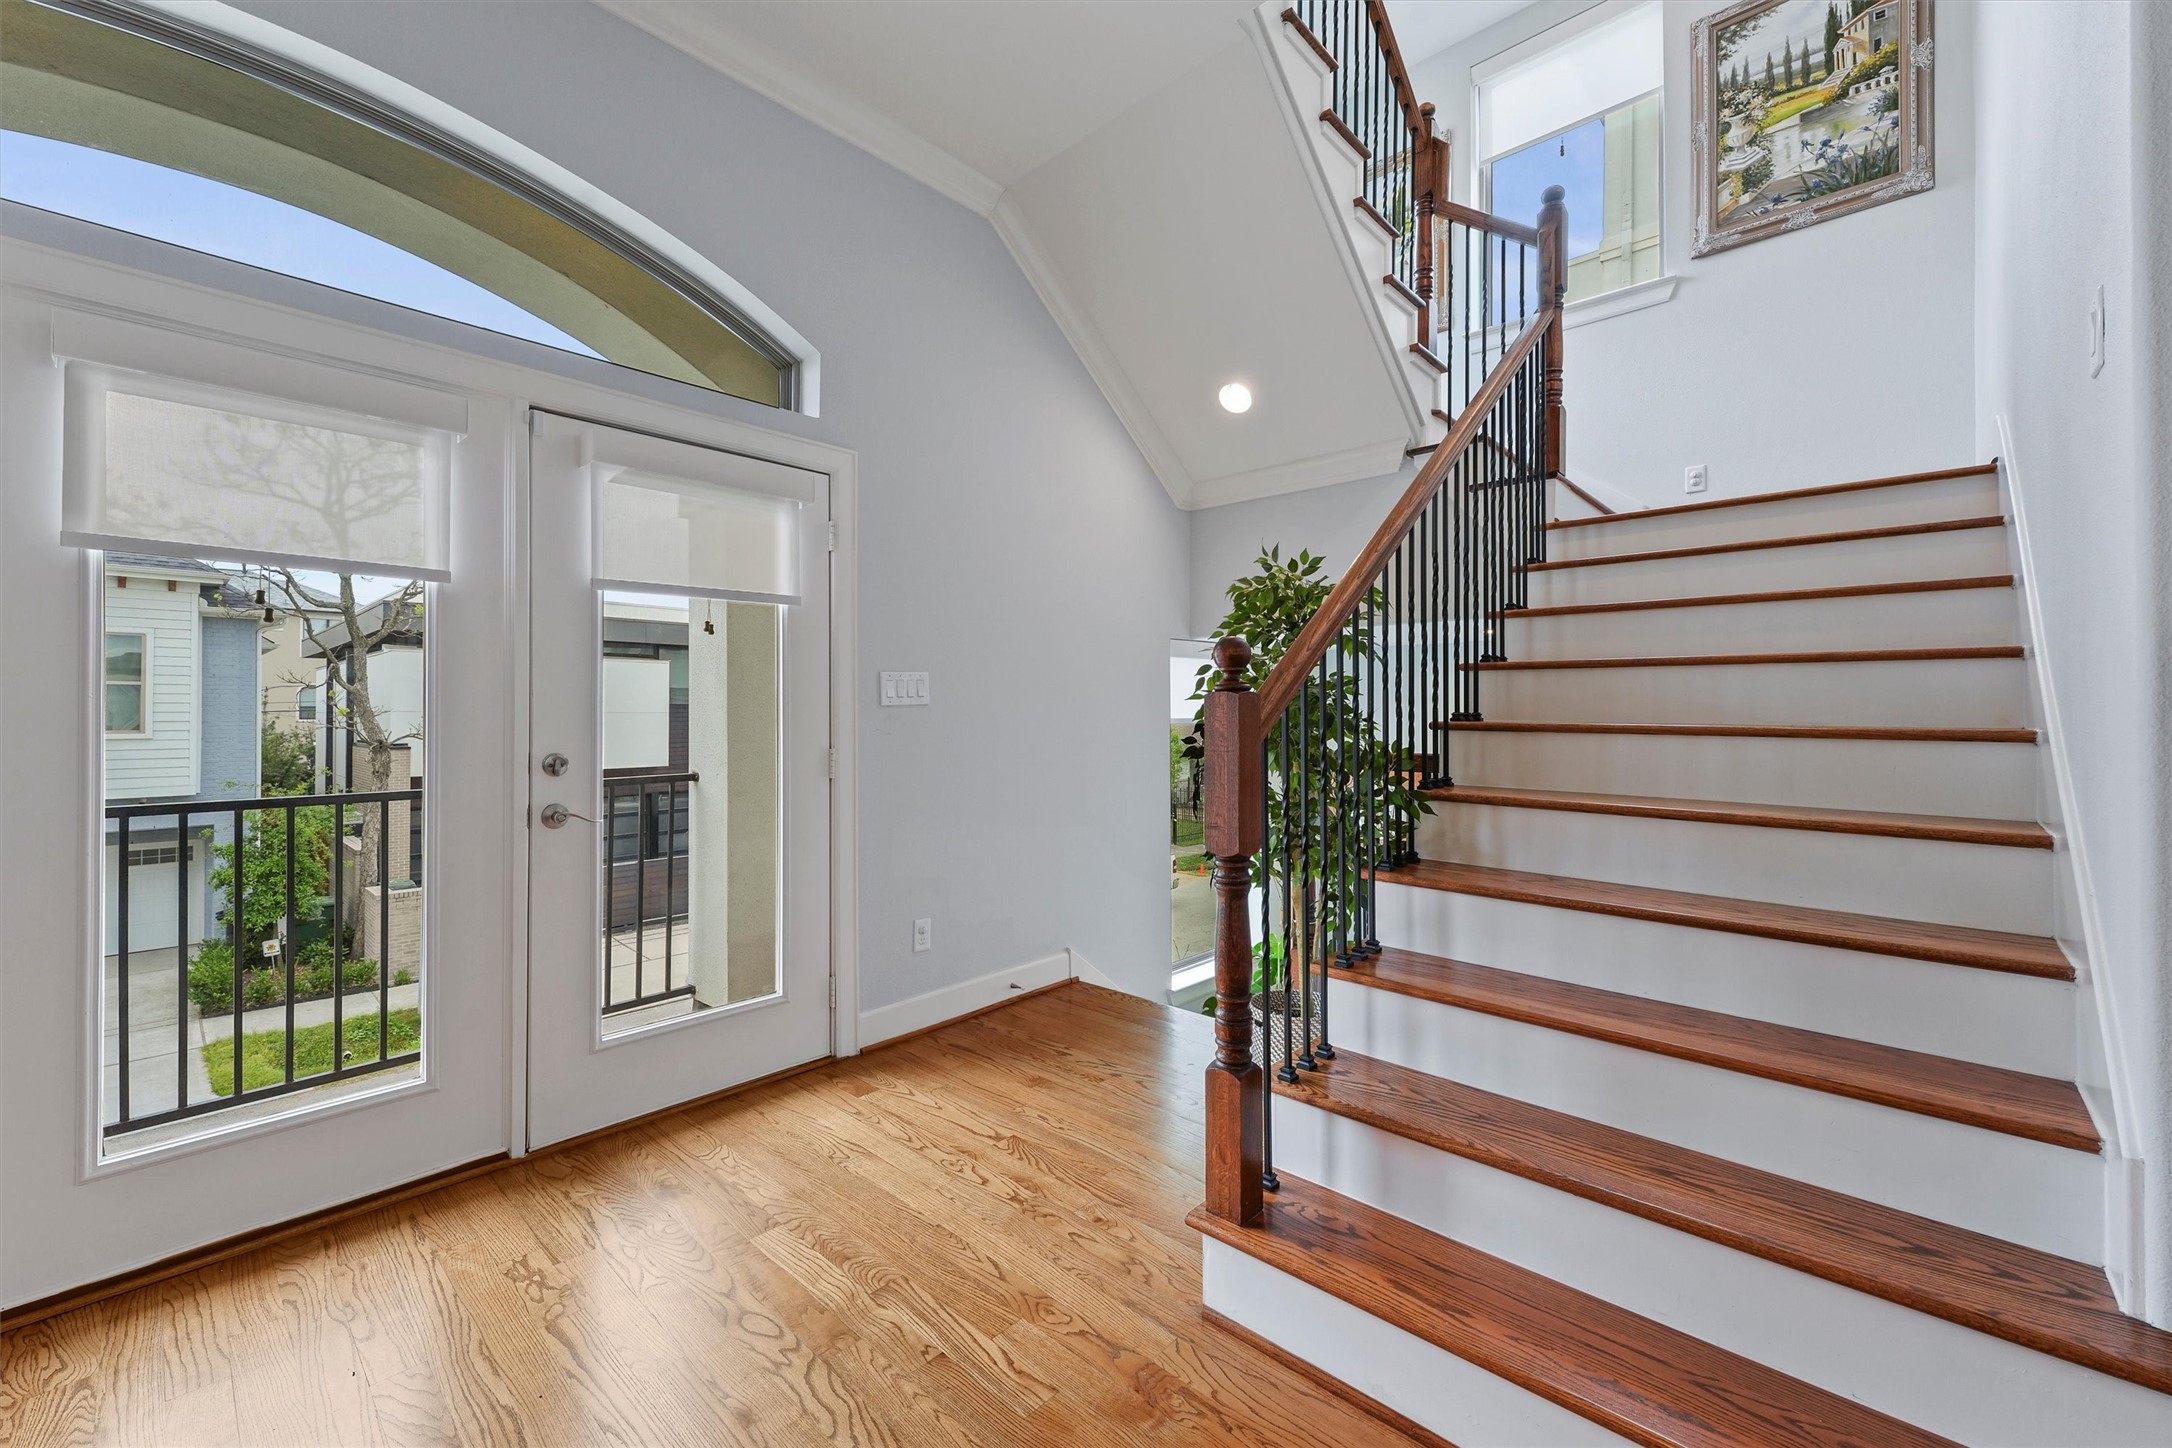 Gorgeous hardwood flooring throughout the entire house